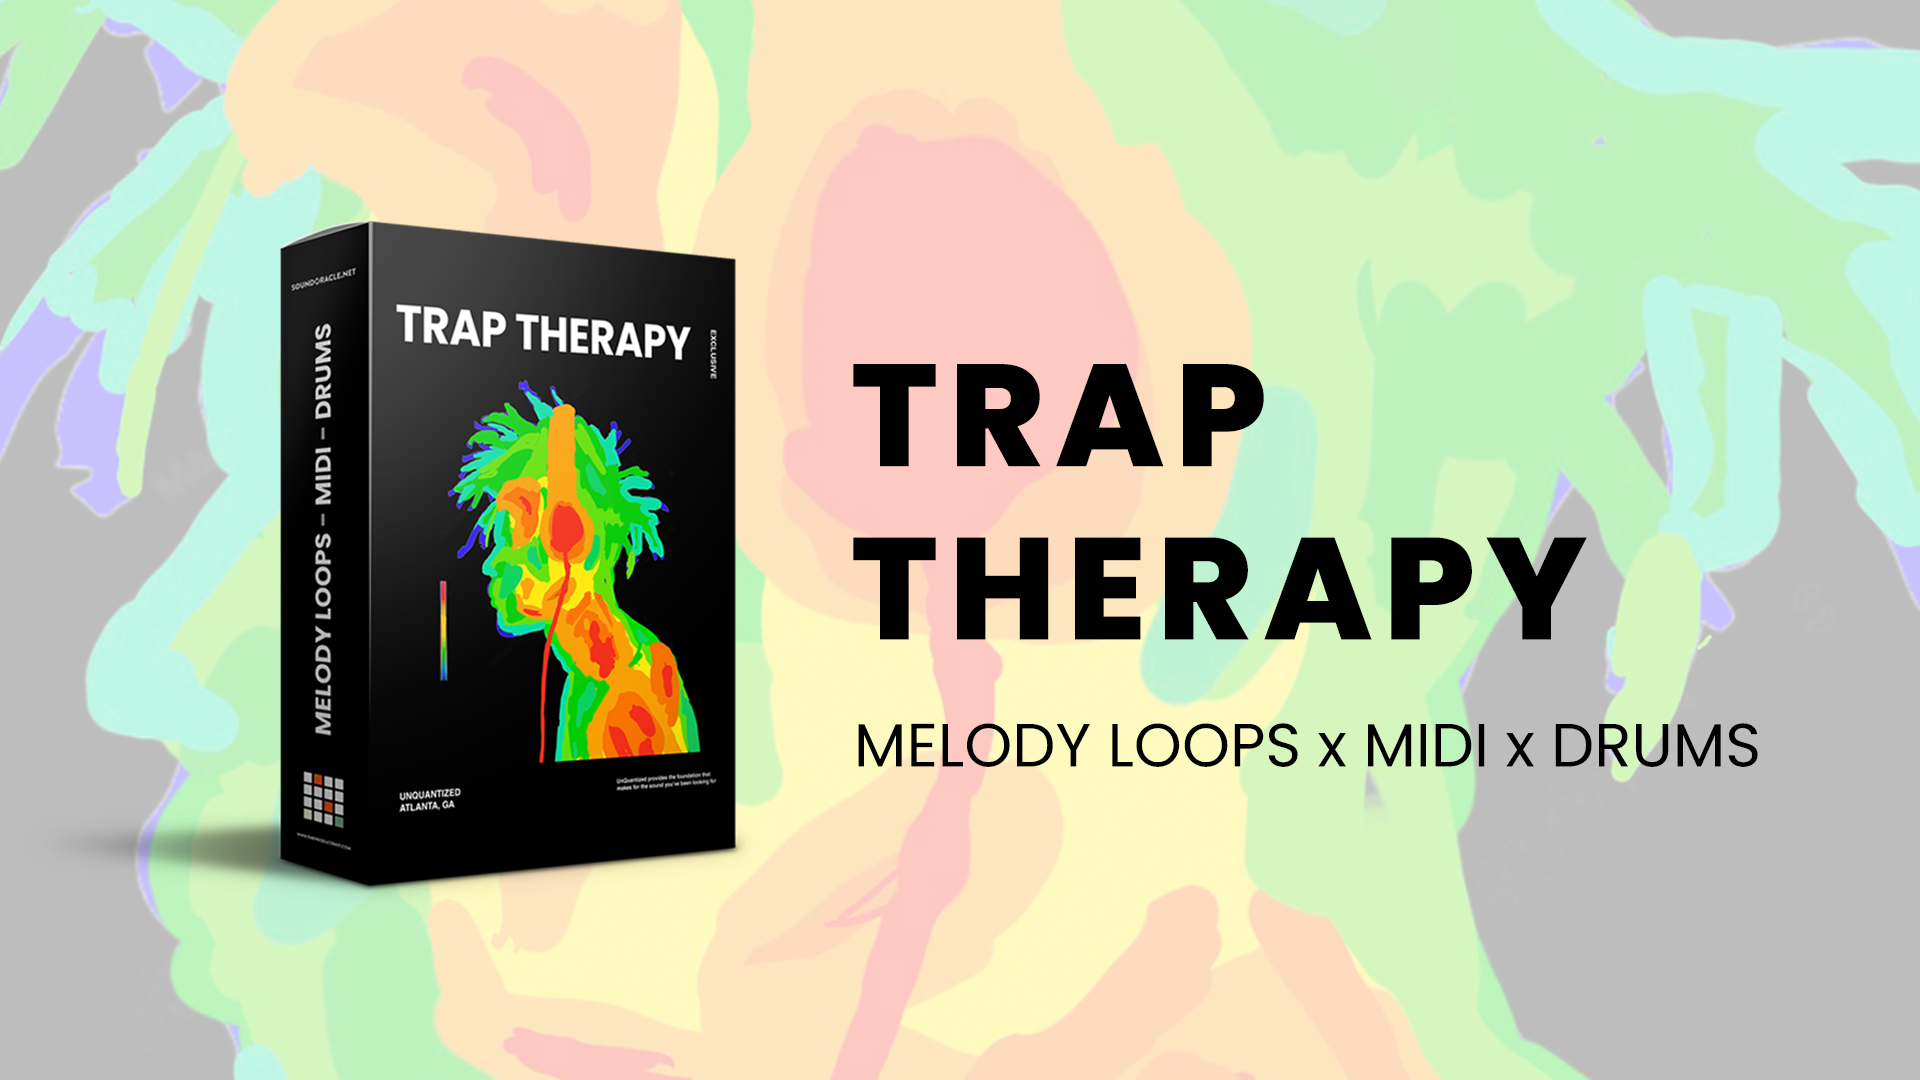 Trap Therapy - Melody Loops x Midi x Drums